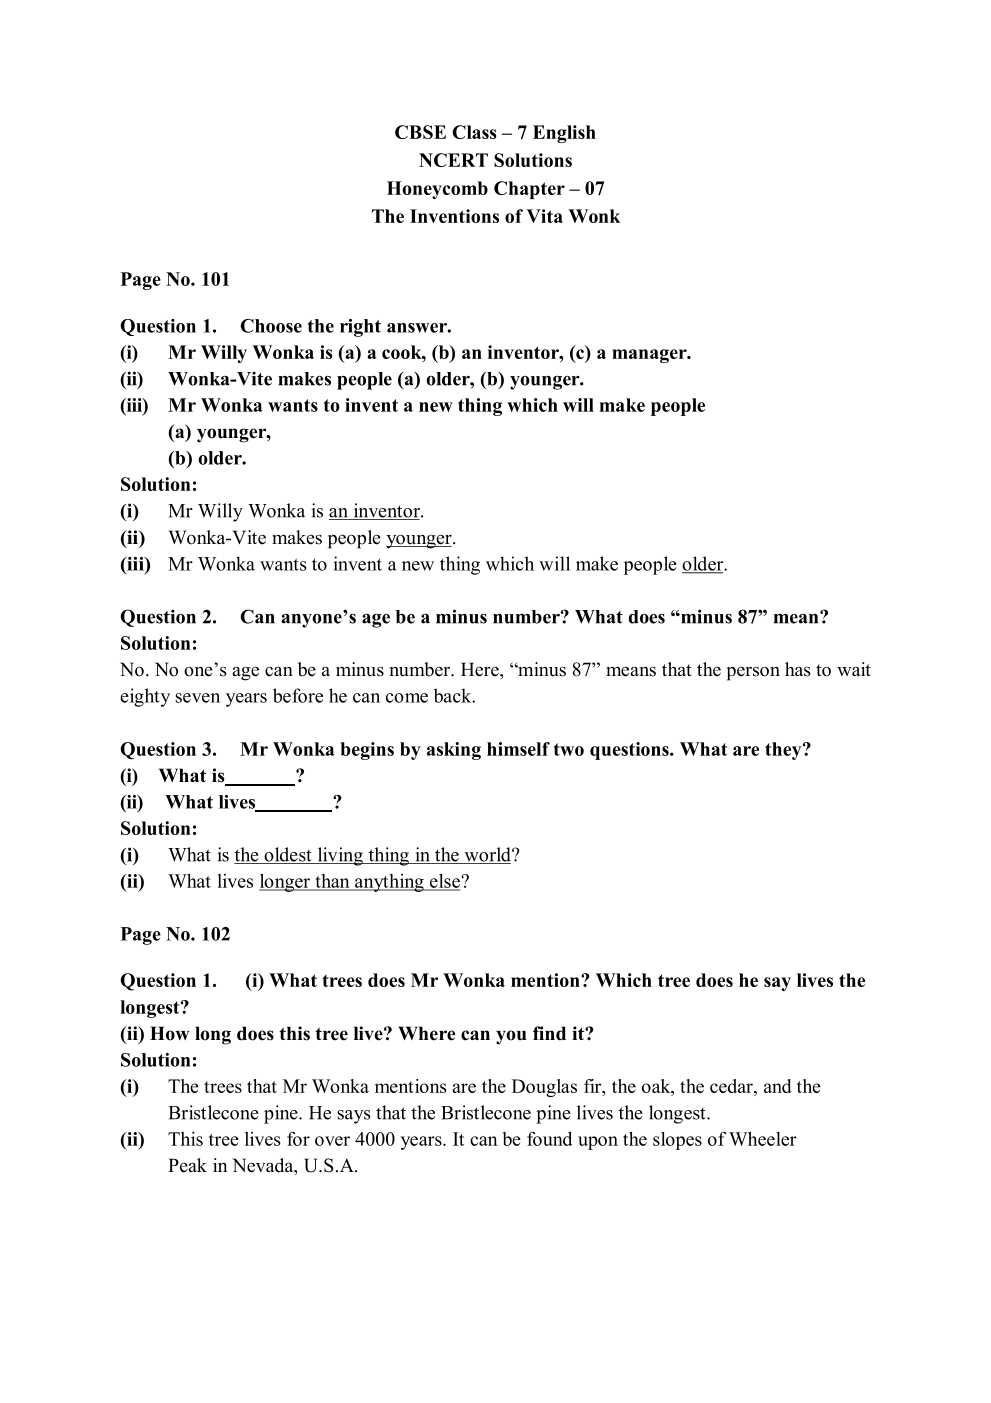 NCERT Solutions For Class 7 English Honeycomb Chapter 7 The Invention of Vita – Wonk